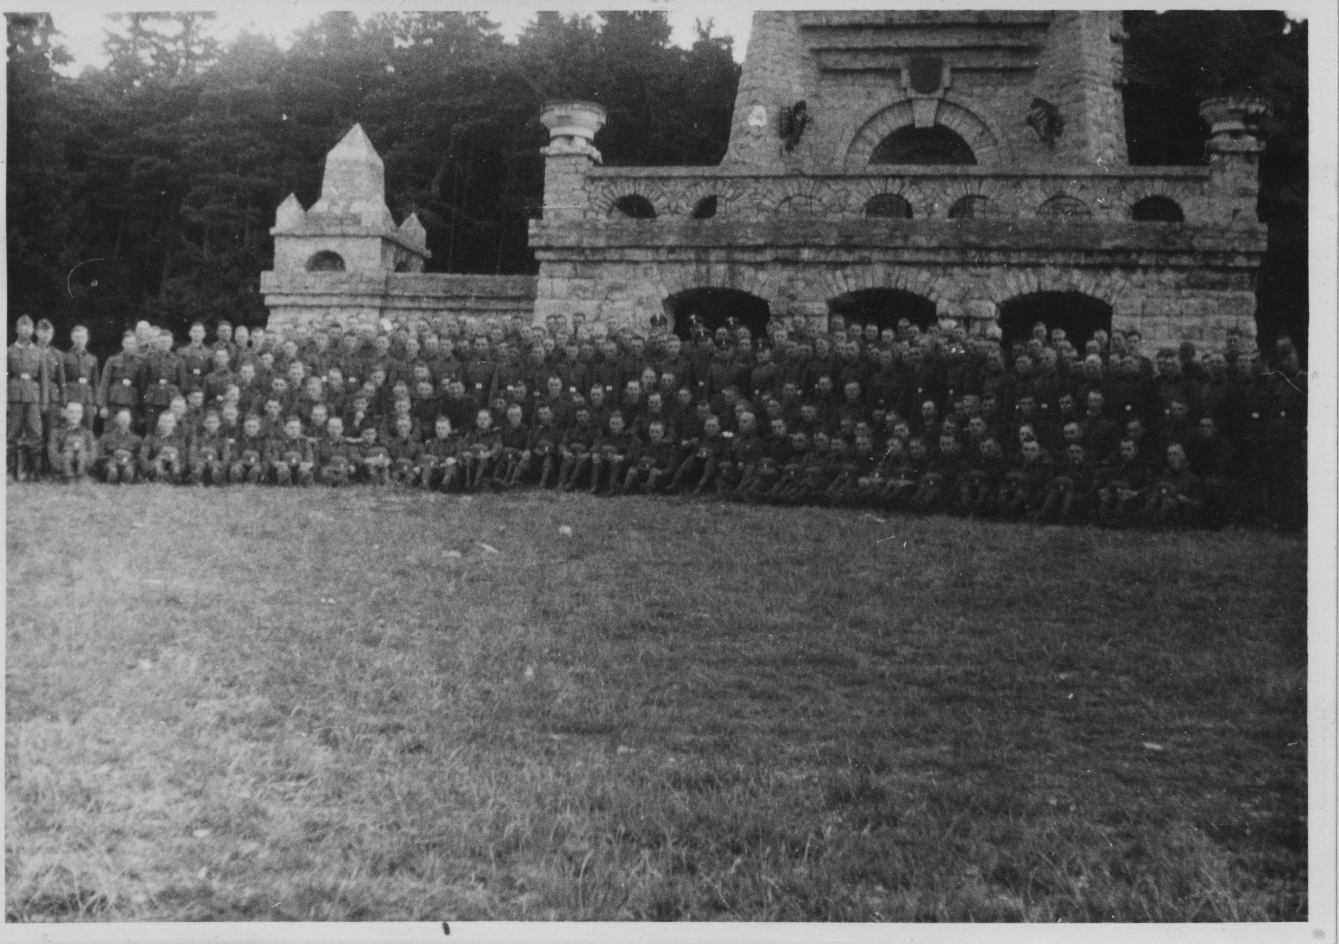 Group picture of members of a recruit unit of the SS-Totenkopfstandarte 14 at the foot of the Bismarck Monument. 